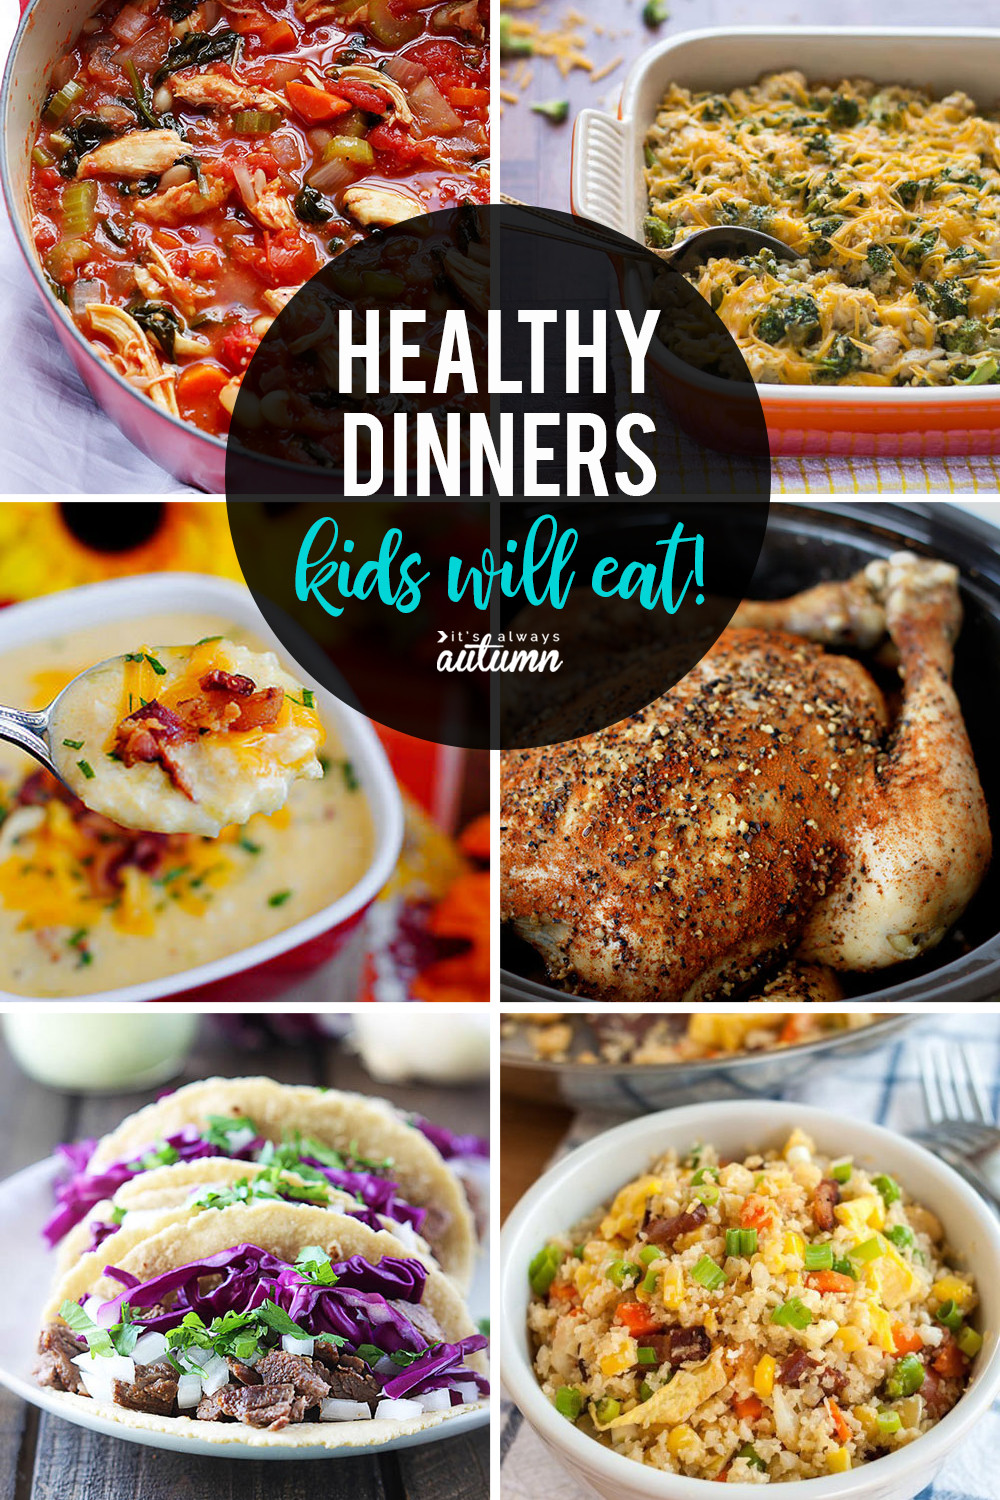 Child Dinner Recipes
 20 healthy easy recipes your kids will actually want to